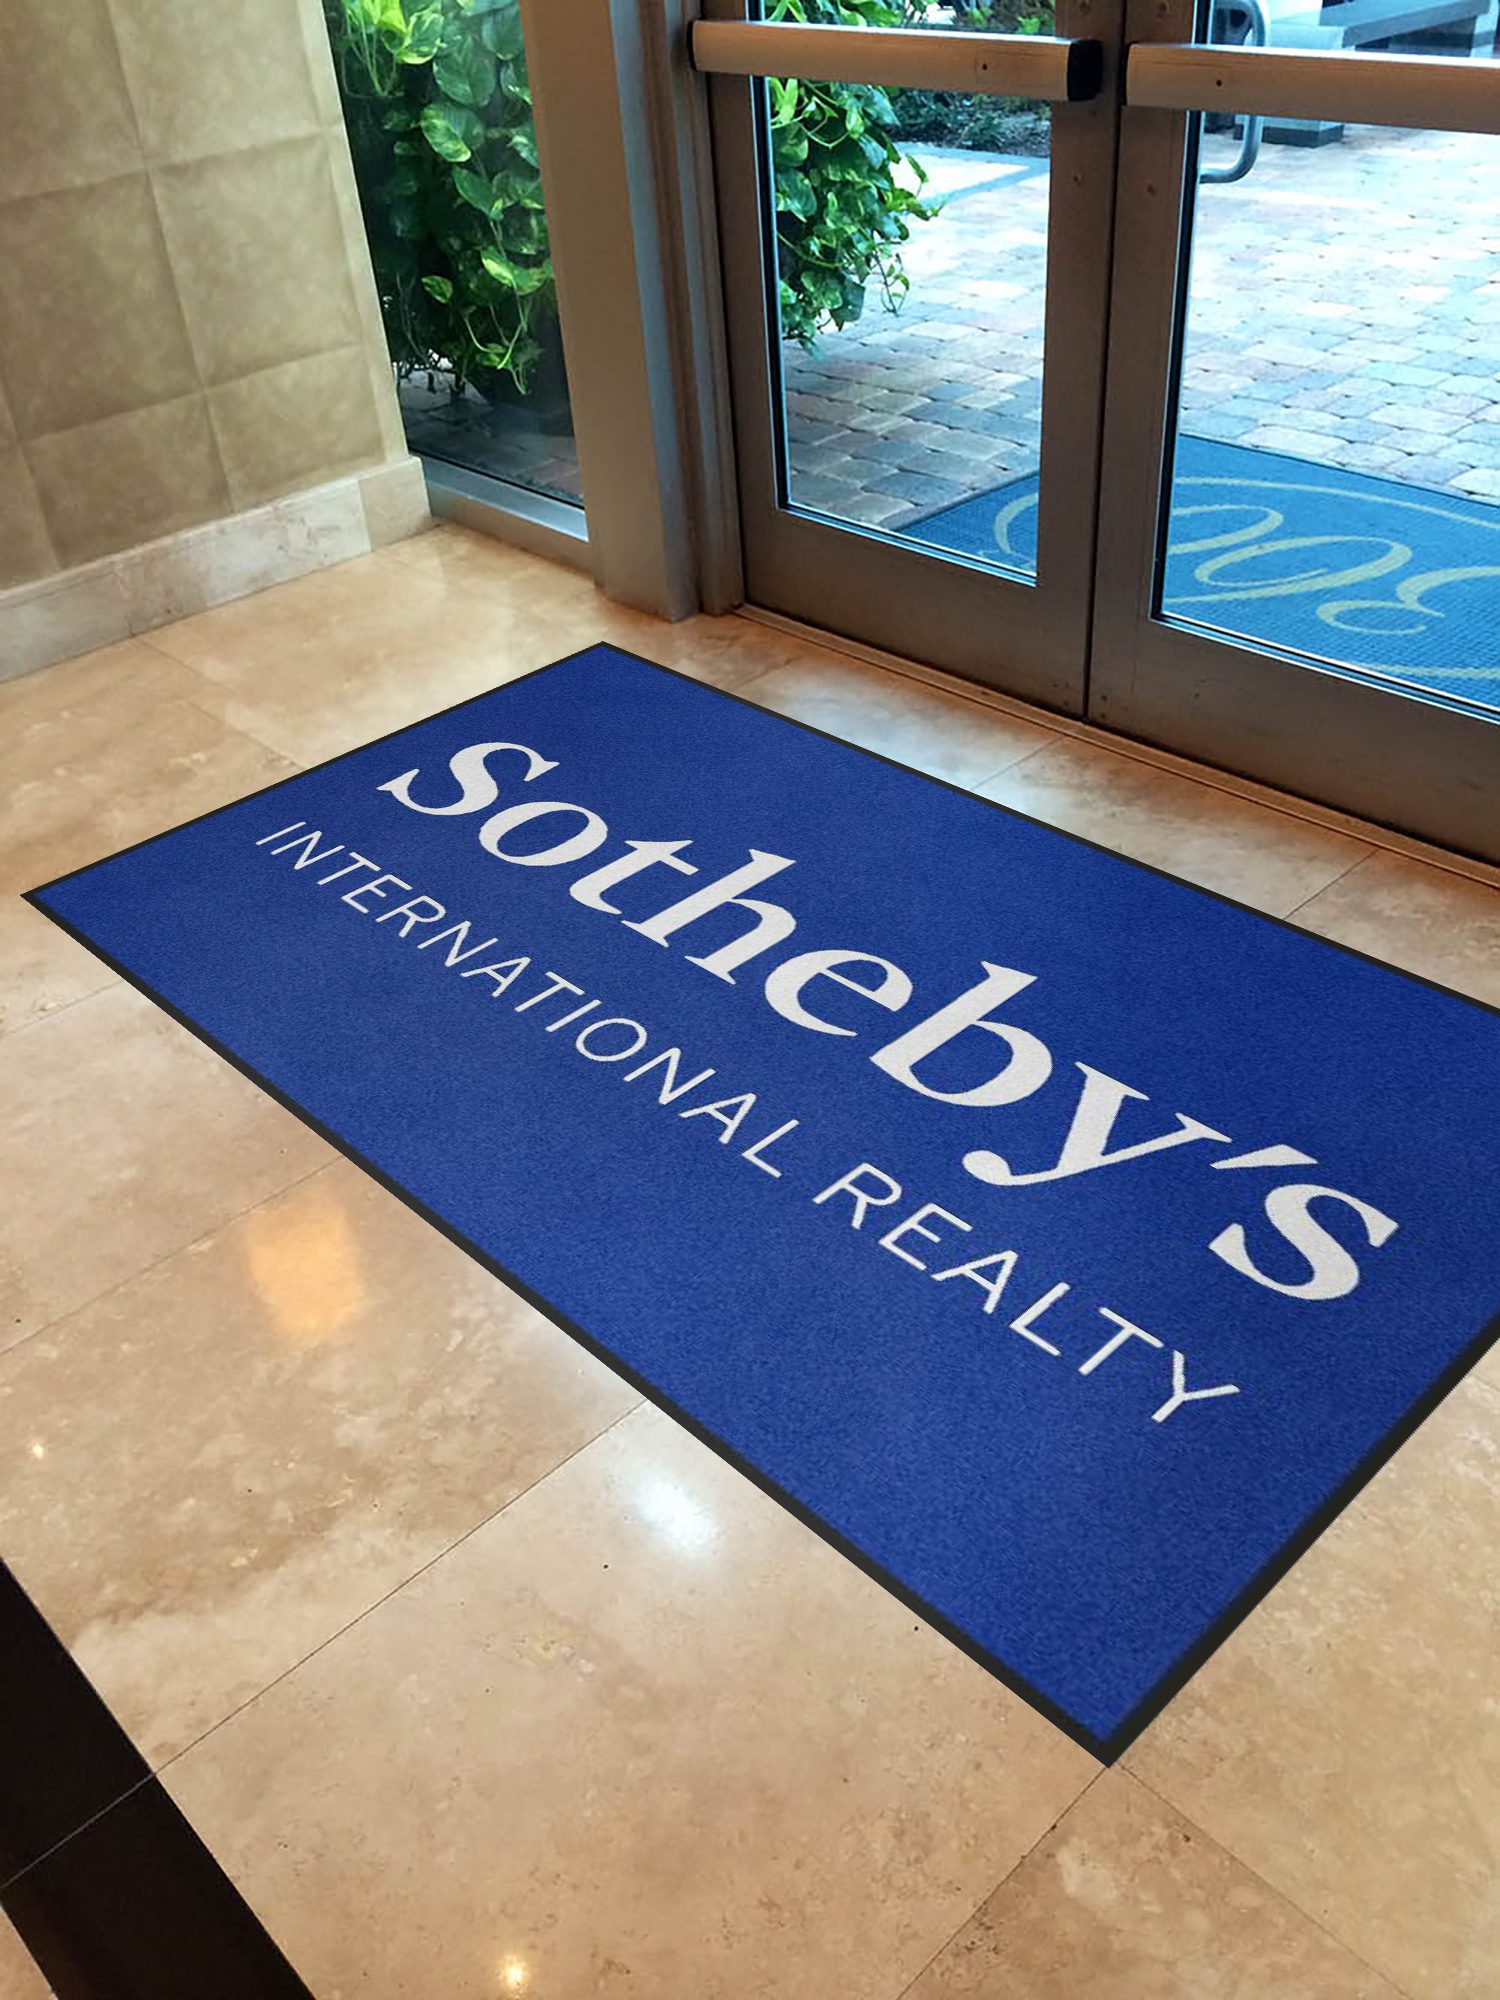 Sotheby's International Realty Personalized Rug